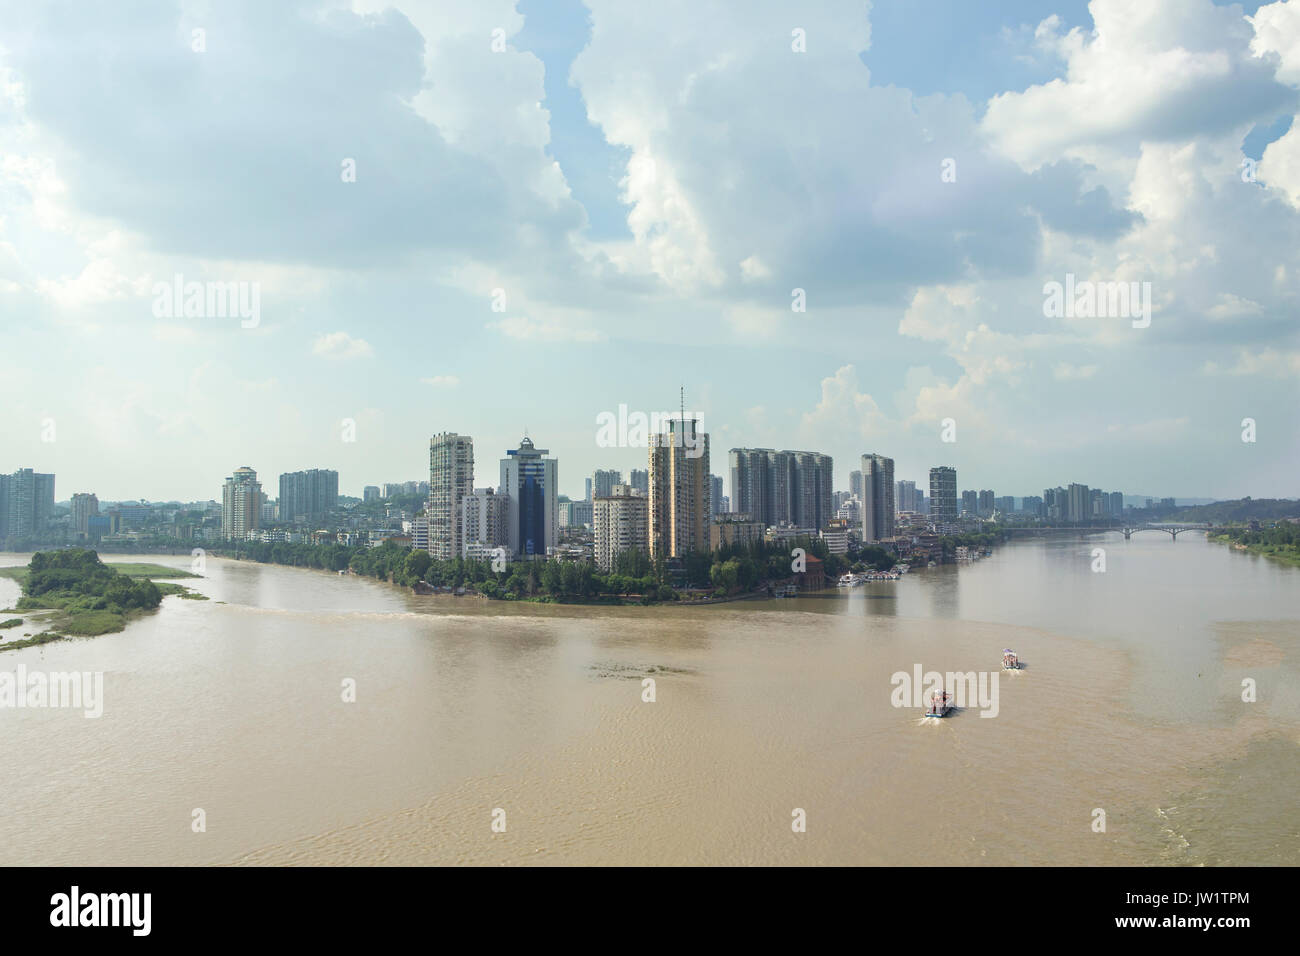 View of Leshan Sichuan province China. City located on the confluence of two big rivers; the Dadu and Min. Seen here muddy and in full flood. Stock Photo